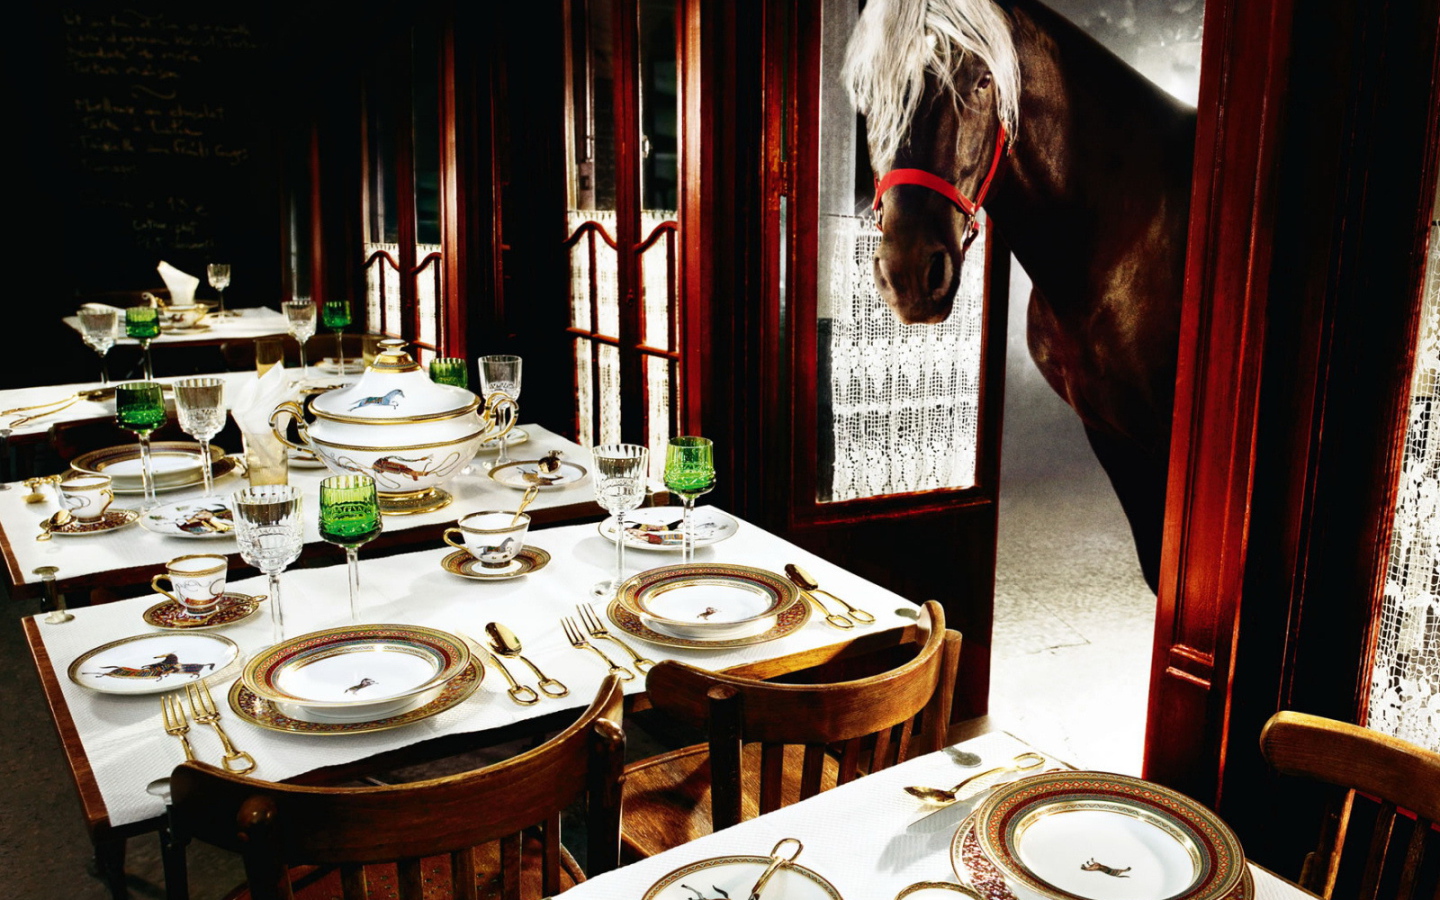 The horse in the cafe